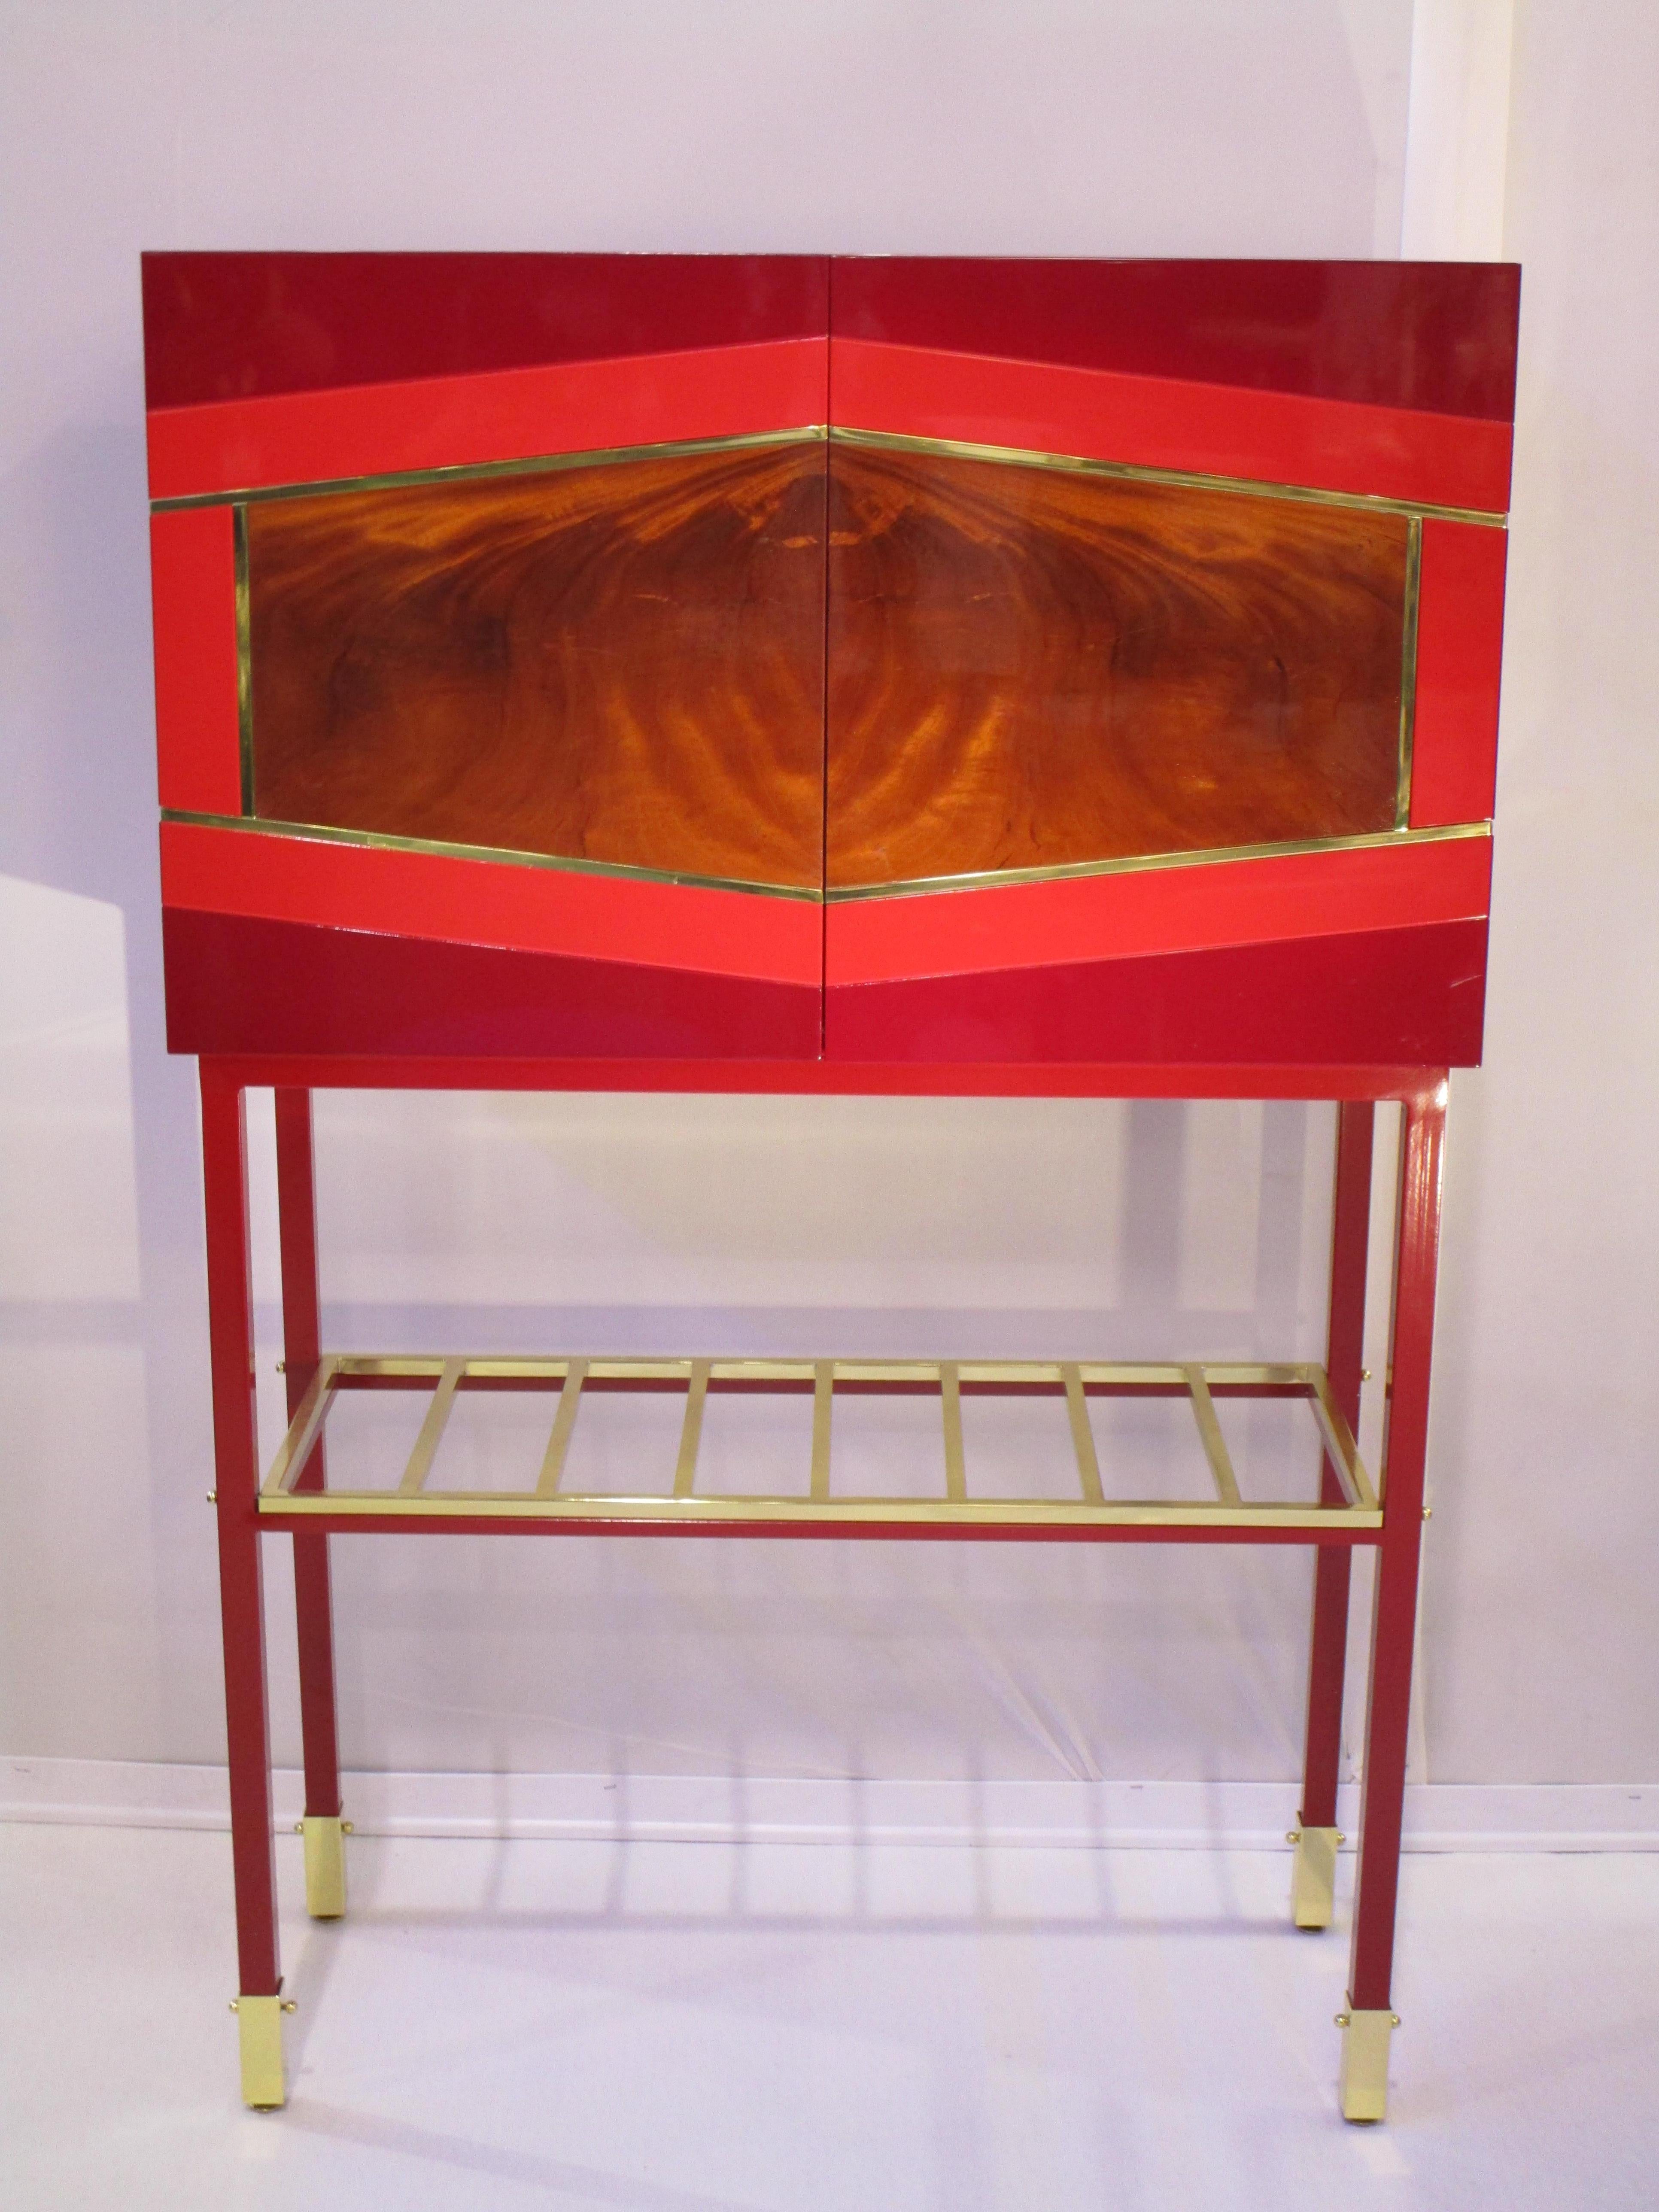 With its striking aesthetic, bold colors and geometric shapes, this modern cabinet blends originality with style in a design that effortlessly matches any decor. 

Featuring lacquer-finished reds and radica front in the shape of a diamond and